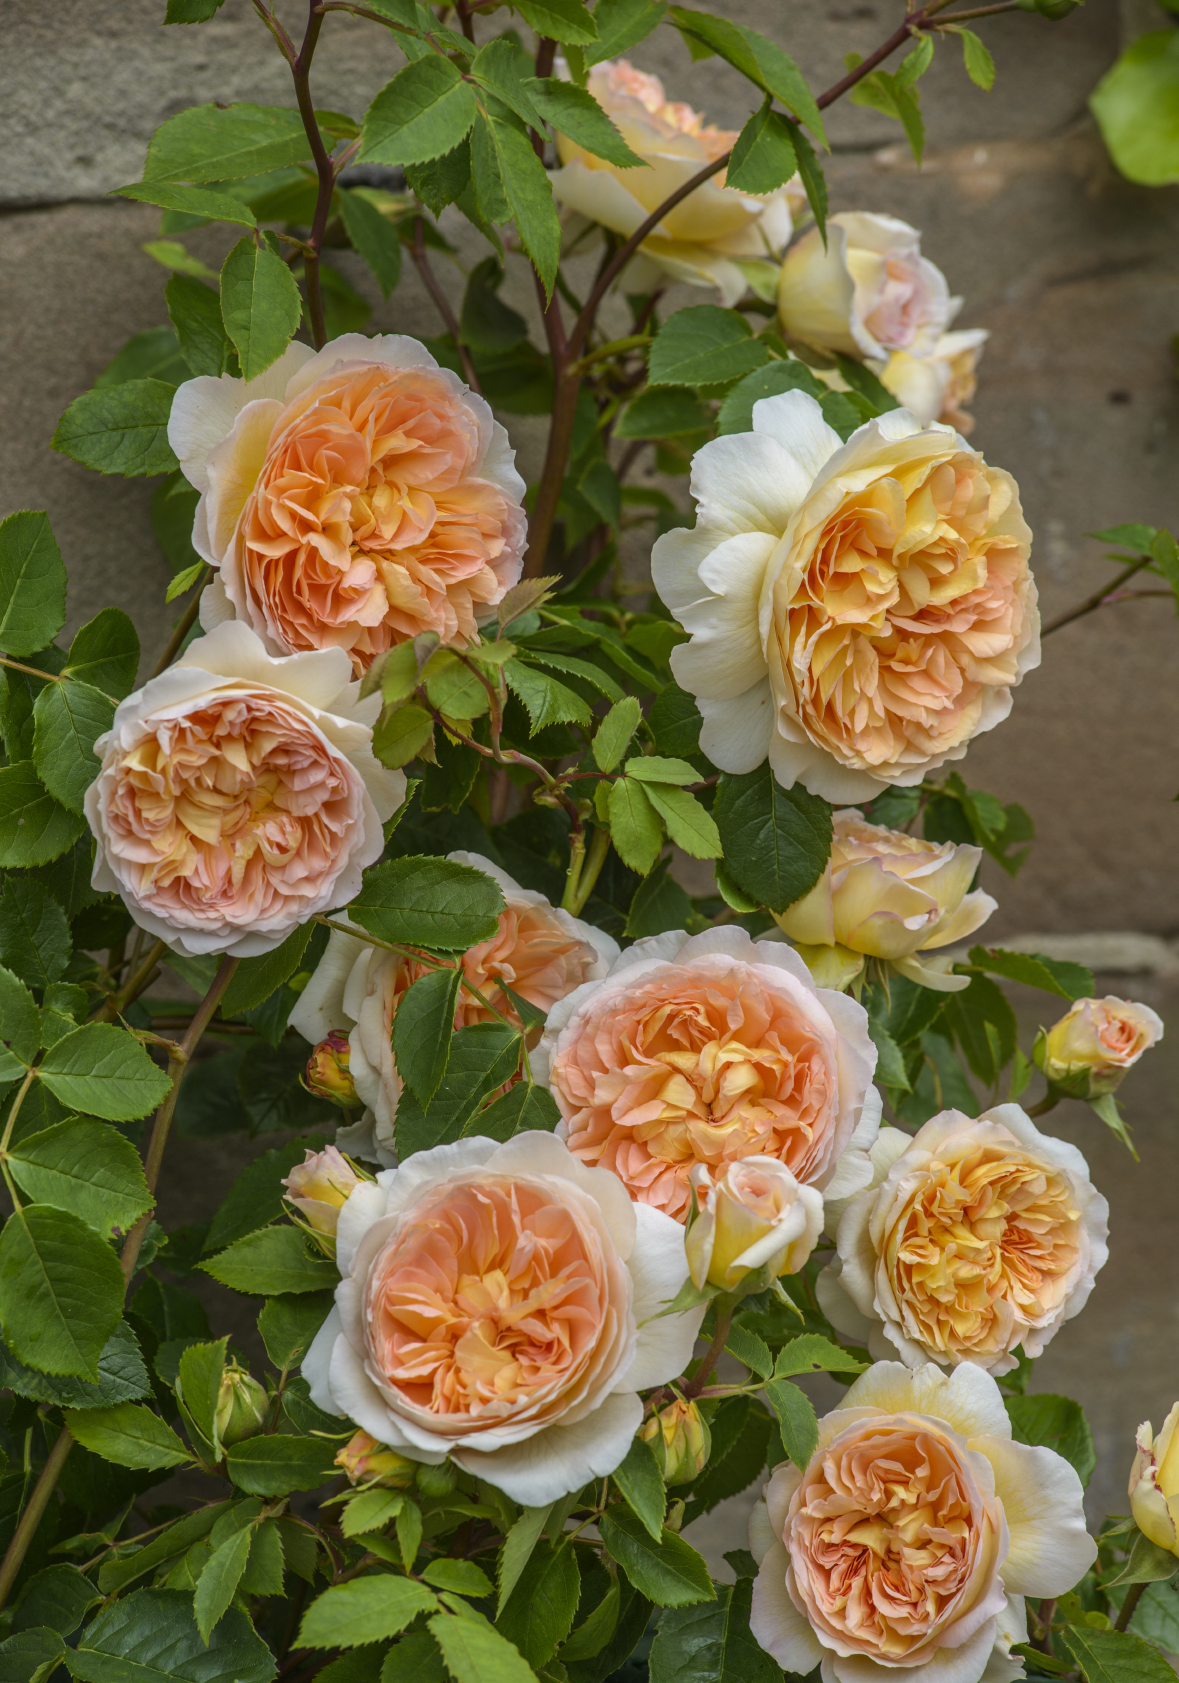 Roald Dahl Roses(apricot) are extremely robust and have a lovely fruity Tea scent. Named to mark the centenary of Roald Dahl’s birth. Image courtesy of David Austin Roses.